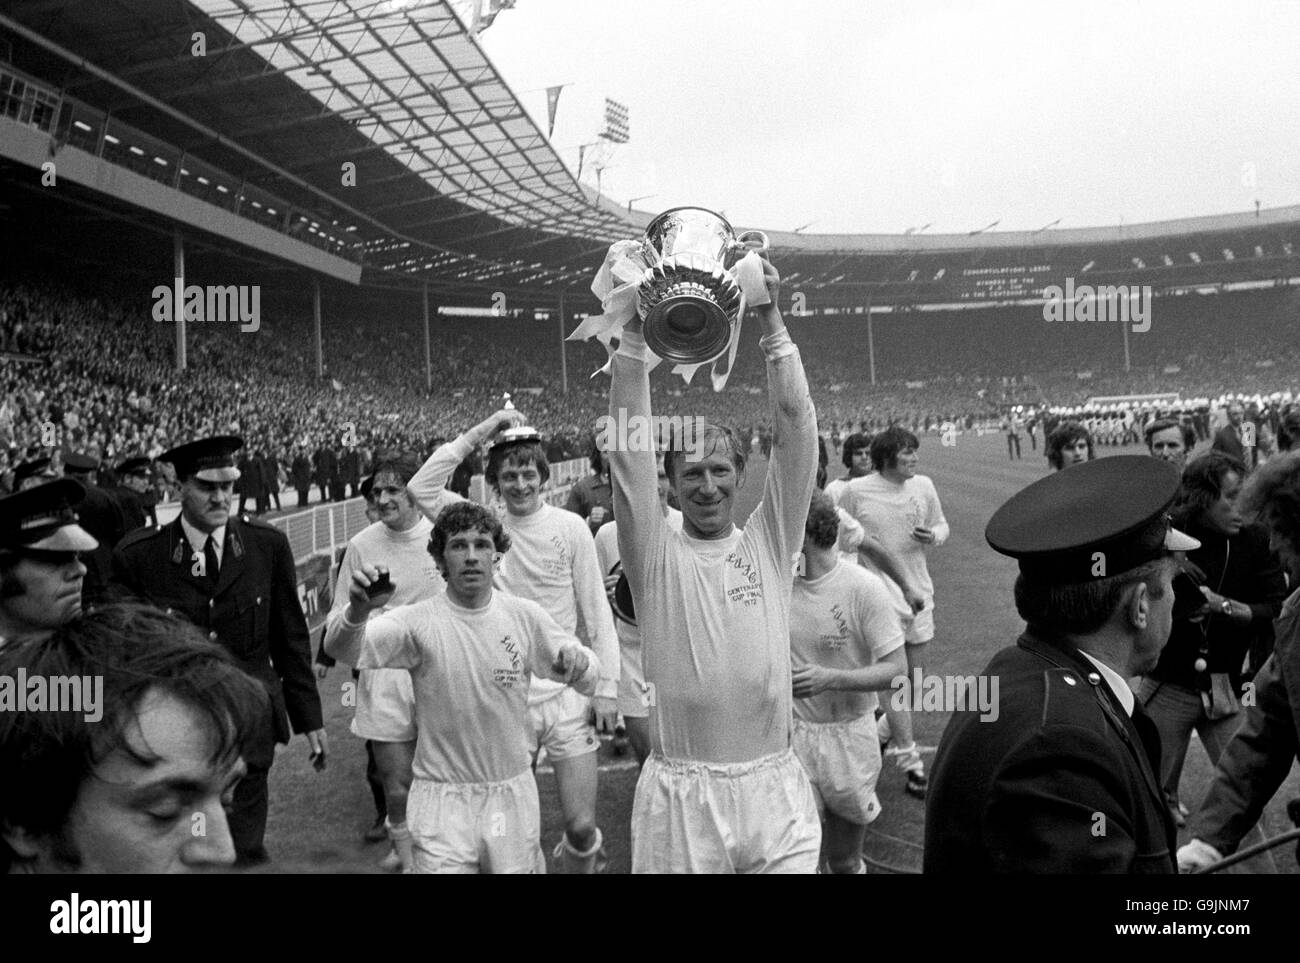 Leeds United's Jack Charlton (lifting FA Cup) makes sure he features in the next day's newspapers by posing with the FA Cup during his team's lap of honour Stock Photo